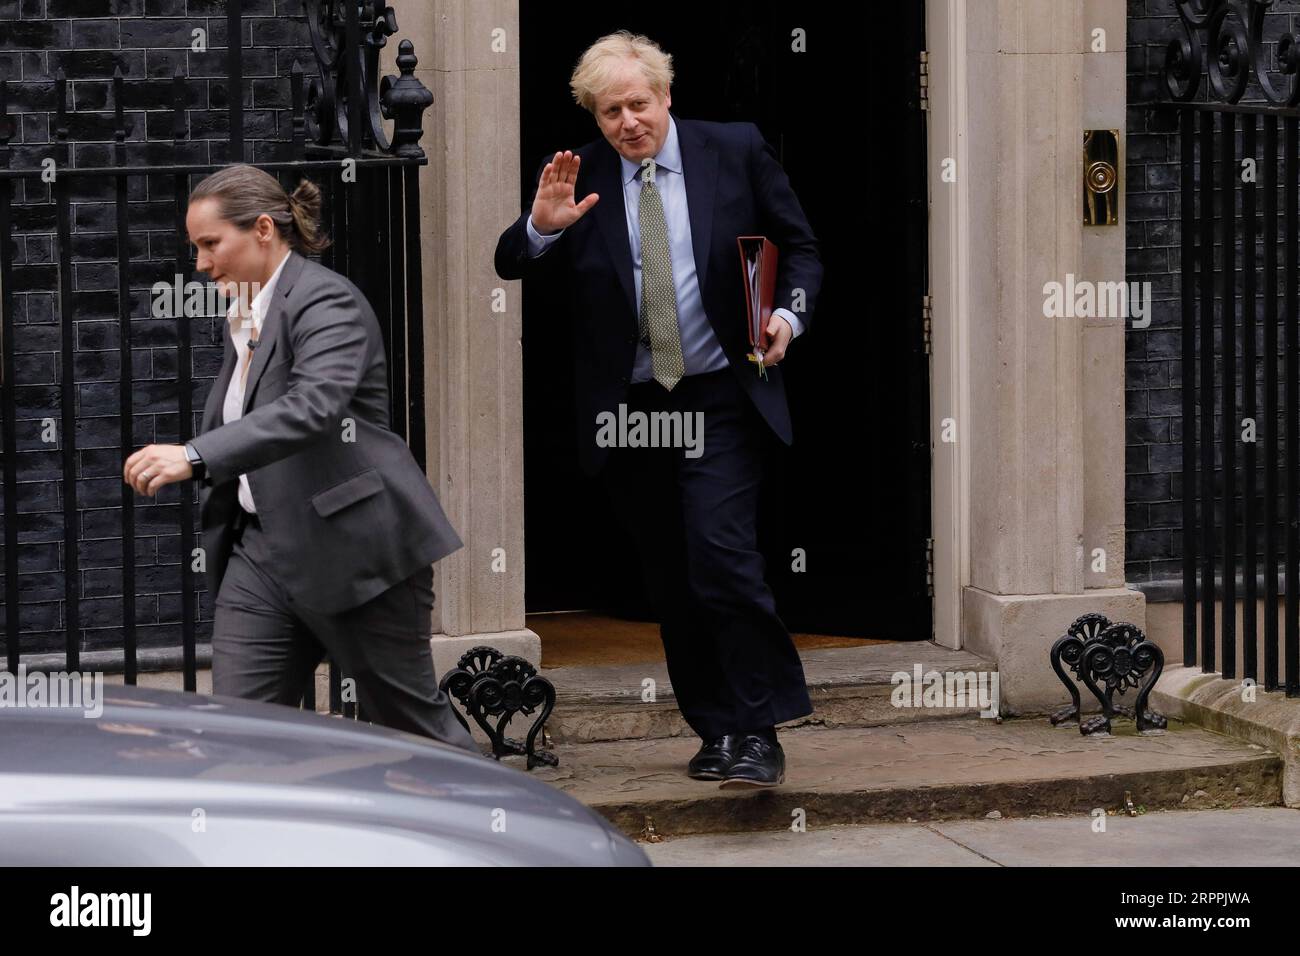 News Bilder des Tages 200318 -- LONDON, March 18, 2020 -- British Prime Minster Boris Johnson leaves 10 Downing Street for Prime Minister s Questions, in London, Britain on March 18, 2020. Photo by Tim Ireland/Xinhua BRITAIN-LONDON-PMQ HanxYan PUBLICATIONxNOTxINxCHN Stock Photo